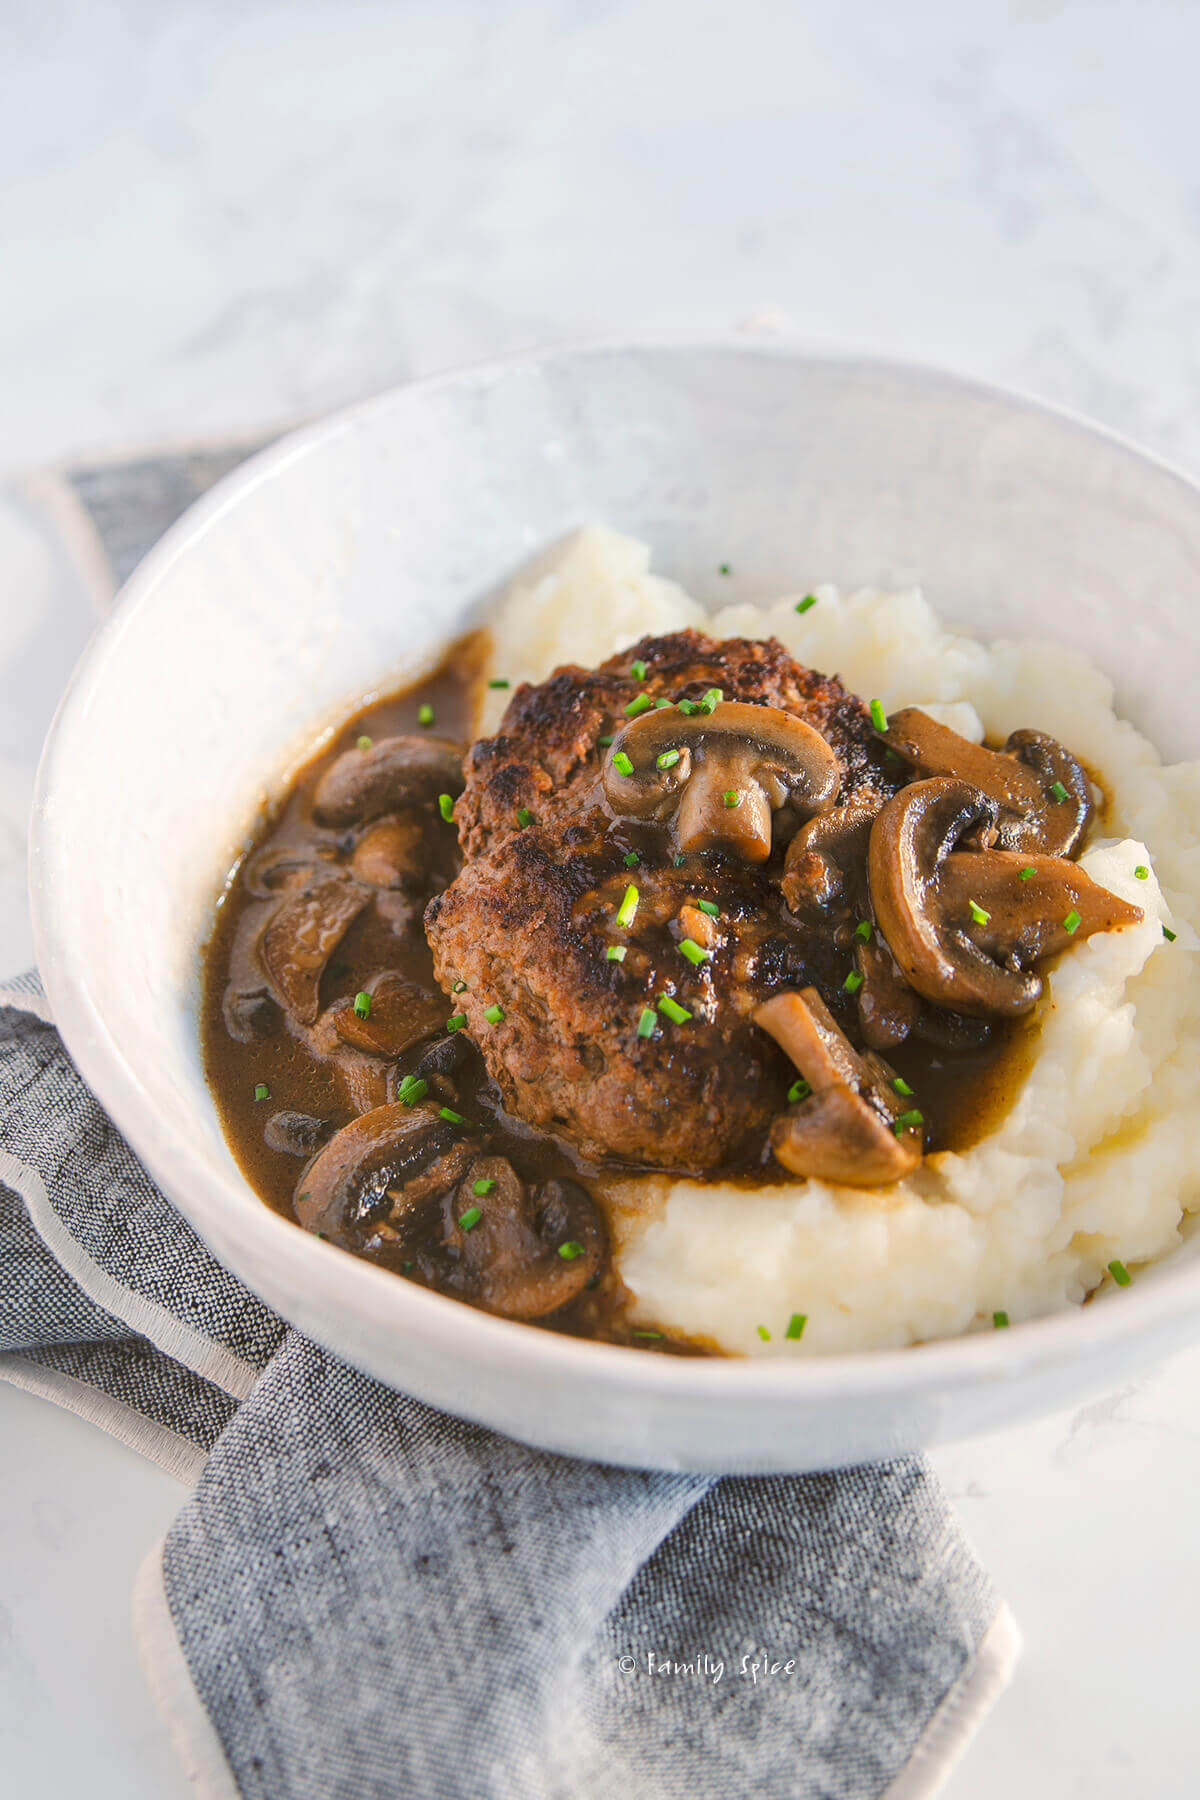 Side view of a shallow bowl with mashed potatoes and salisbury steak with mushroom gravy